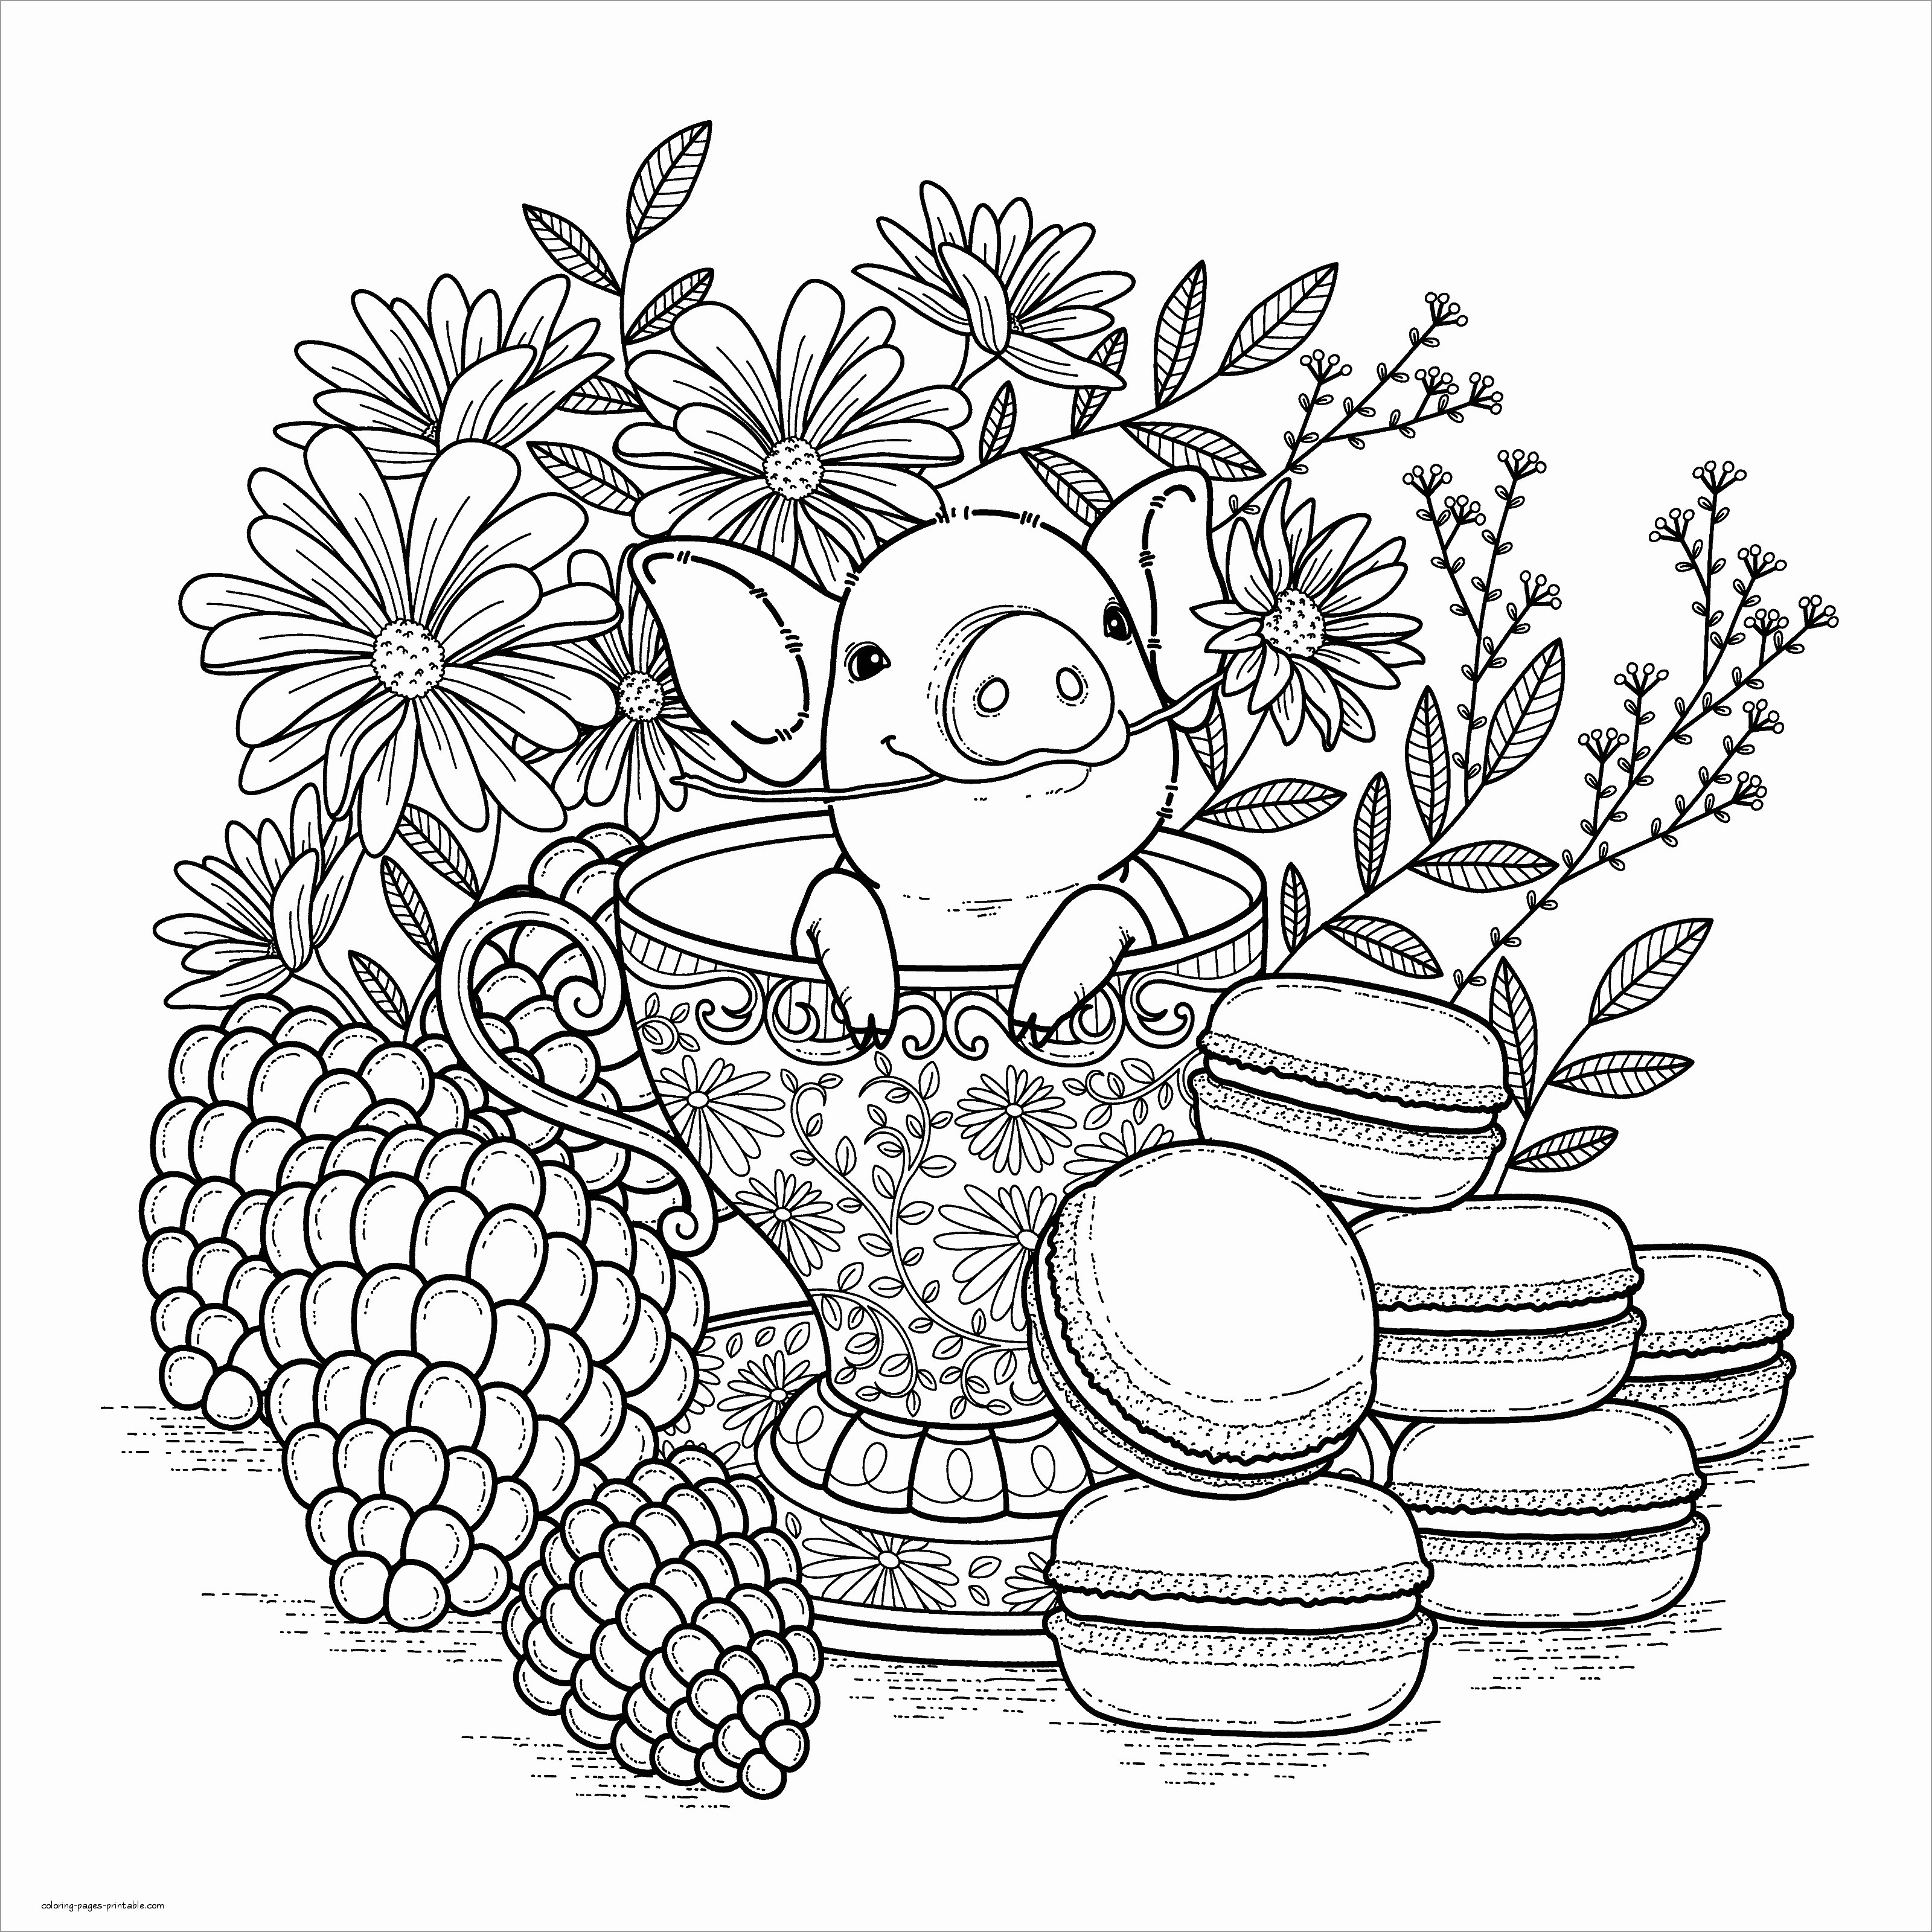 Pork Coloring Page for Adult